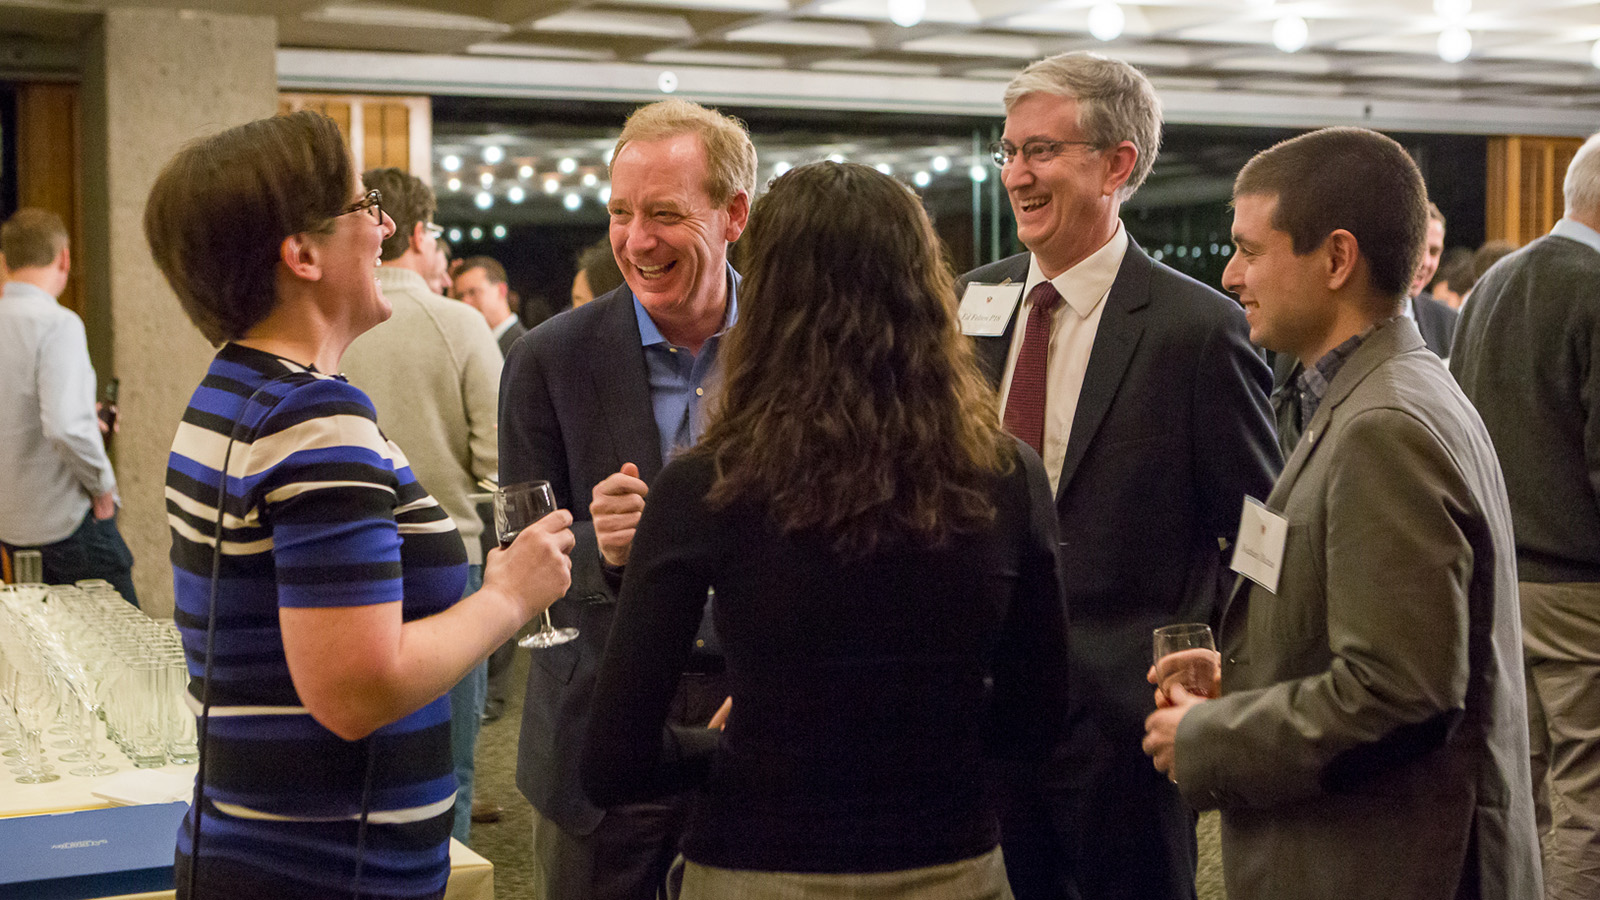 Microsoft President Brad Smith speaks with faculty member at reception